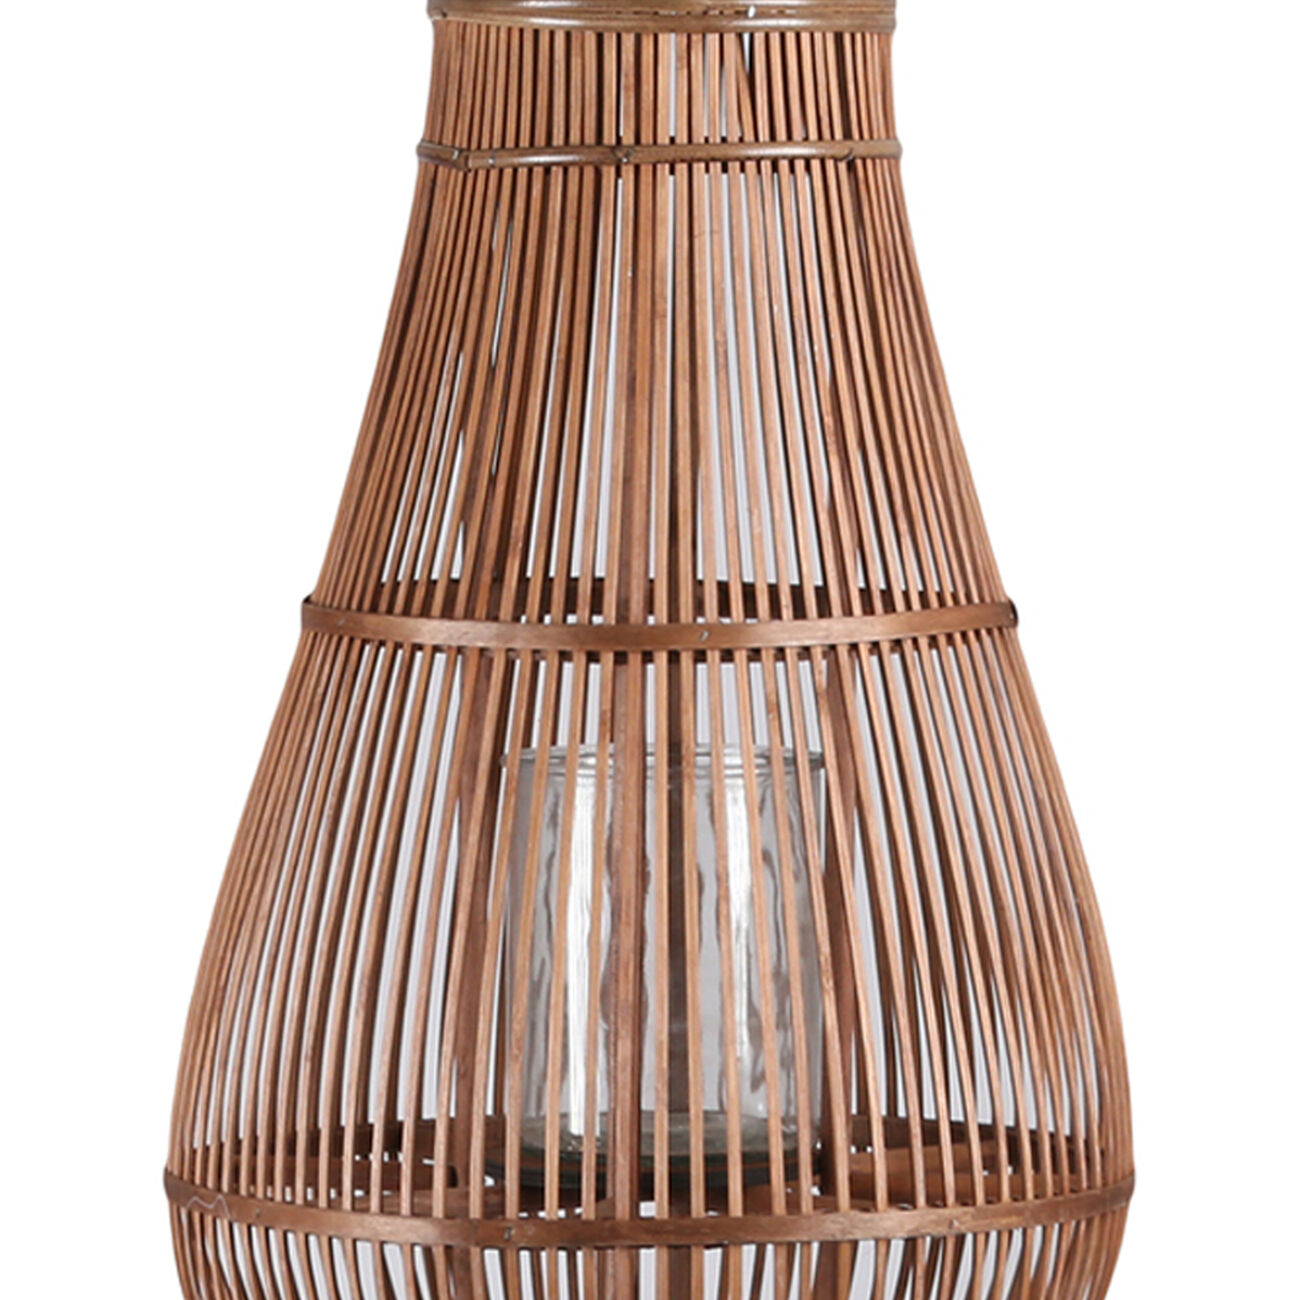 Bellied Shape Lantern with Glass Hurricane and Lattice Design,Large,Brown